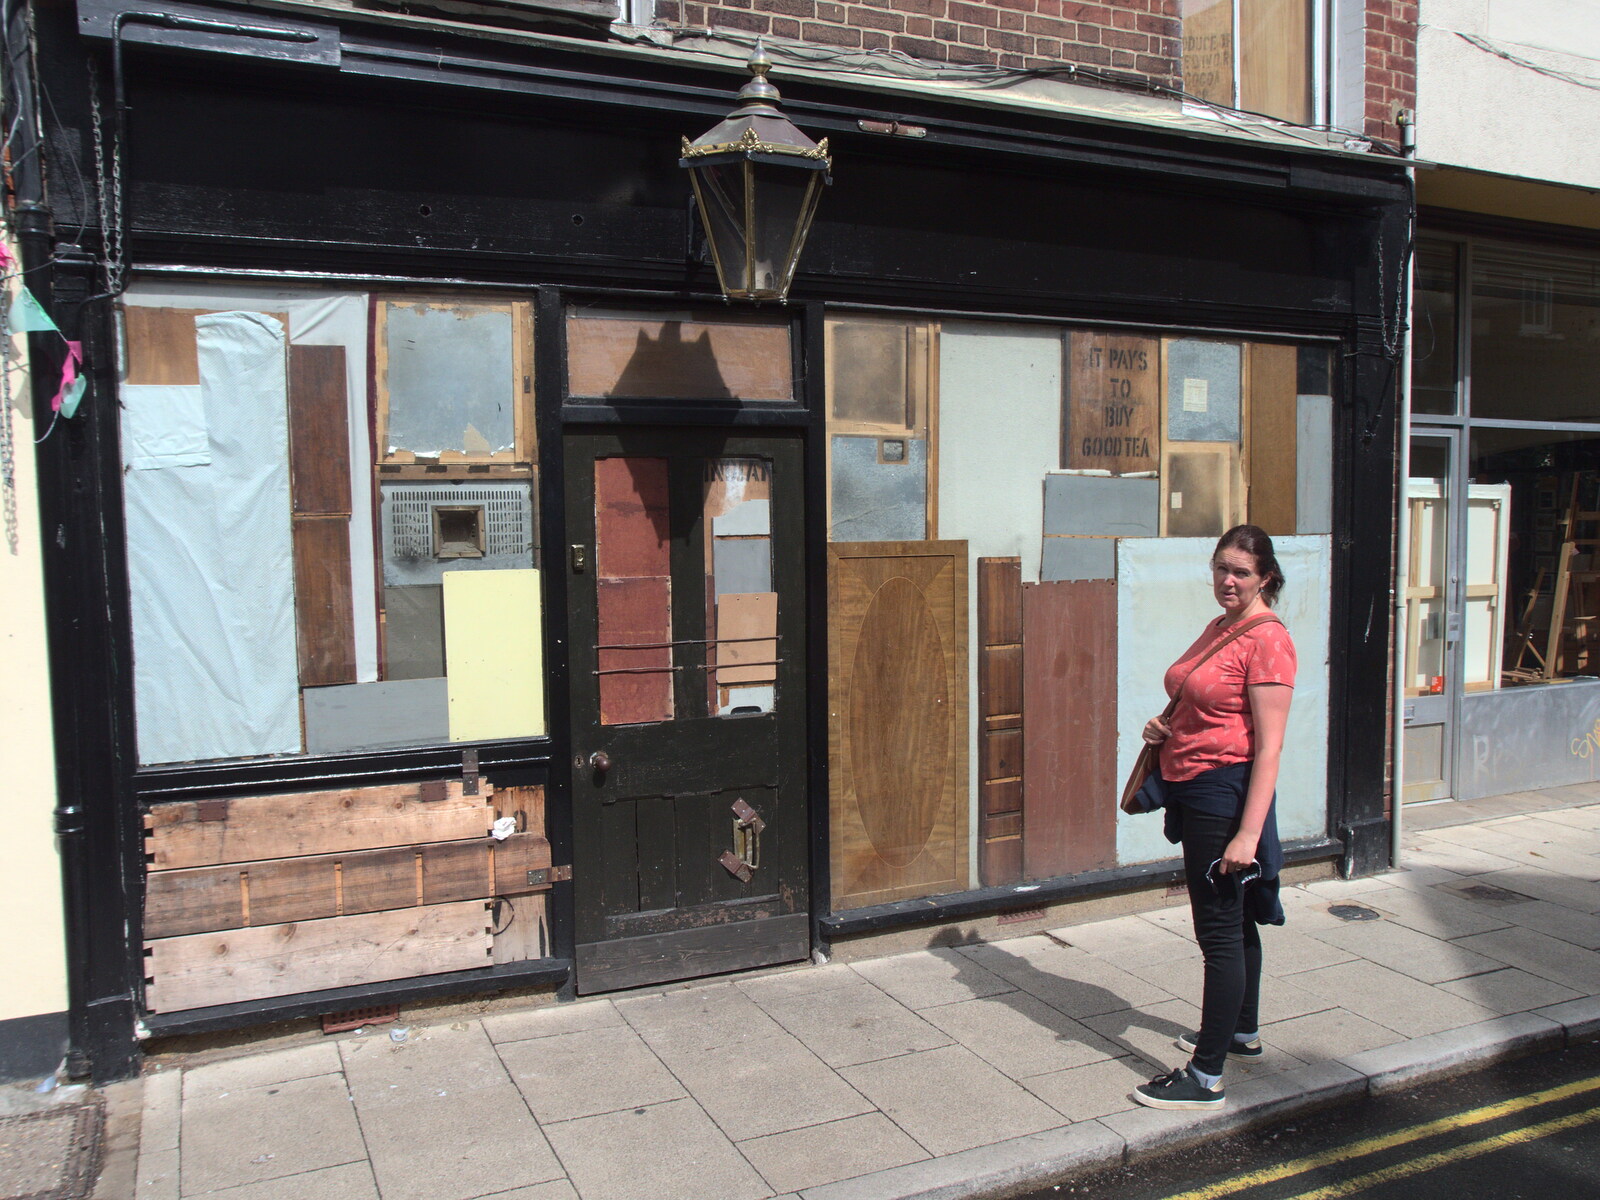 Isobel outside a boarded-up shop from Head Out Not Home: A Music Day, Norwich, Norfolk - 22nd August 2021